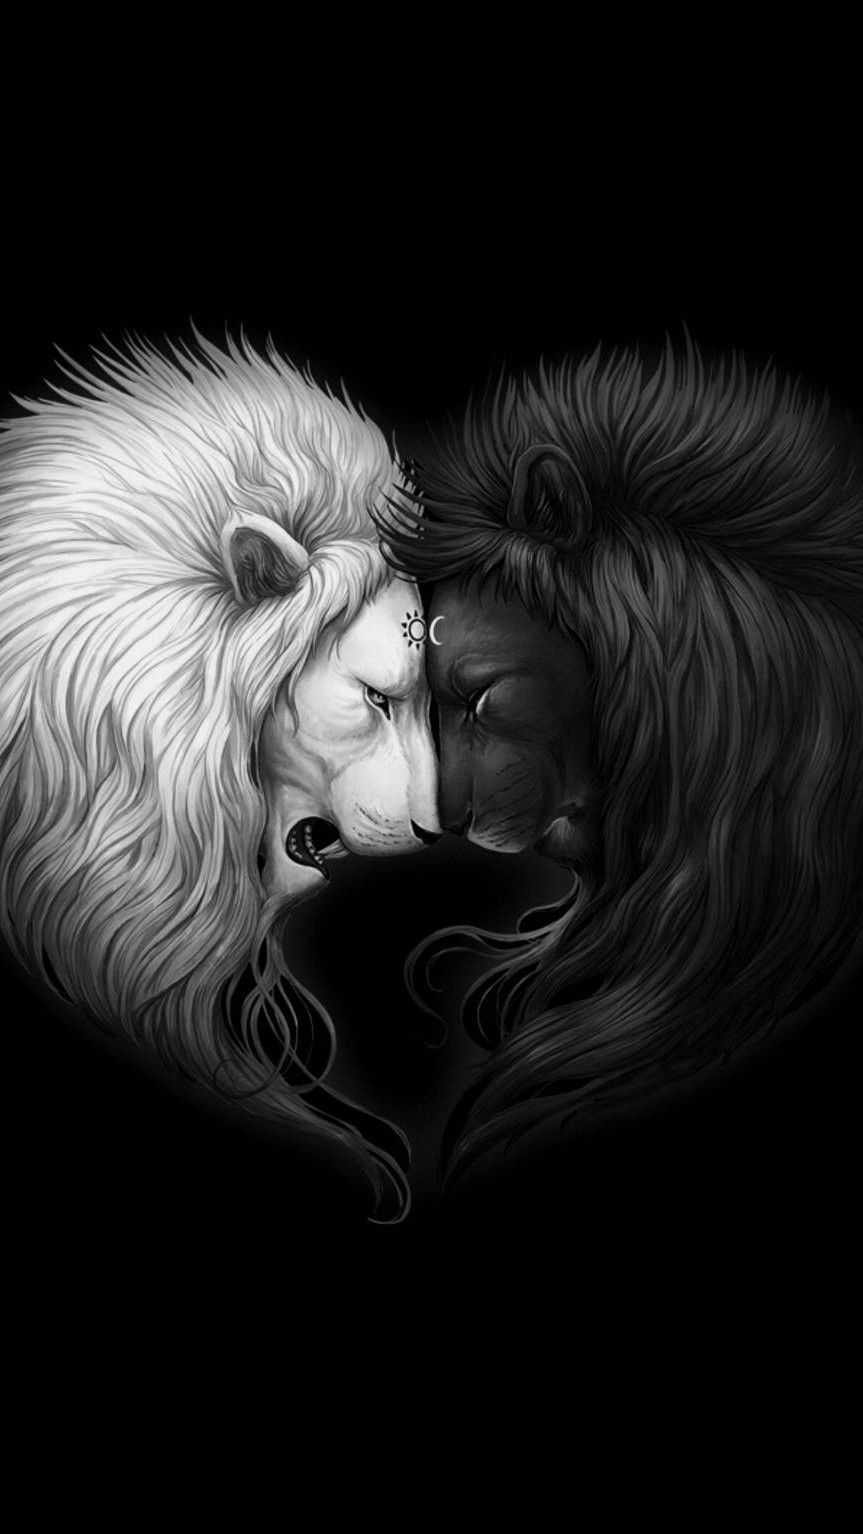 A black and white image of two lions with their heads together. - Lion, Leo